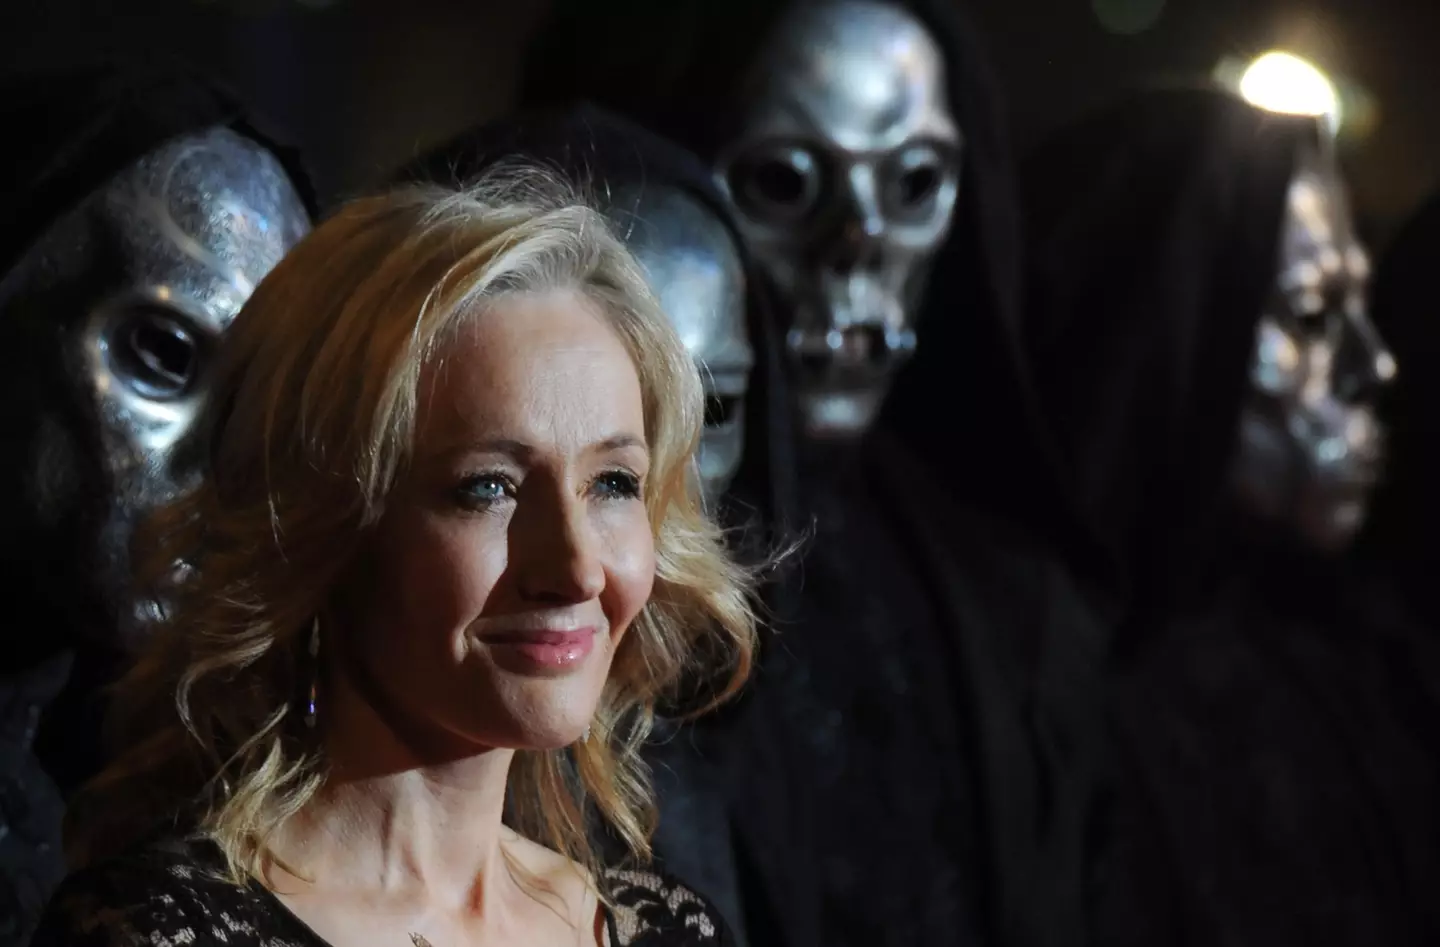 JK Rowling was first accused of being transphobic after a series of tweets she posted in 2020.